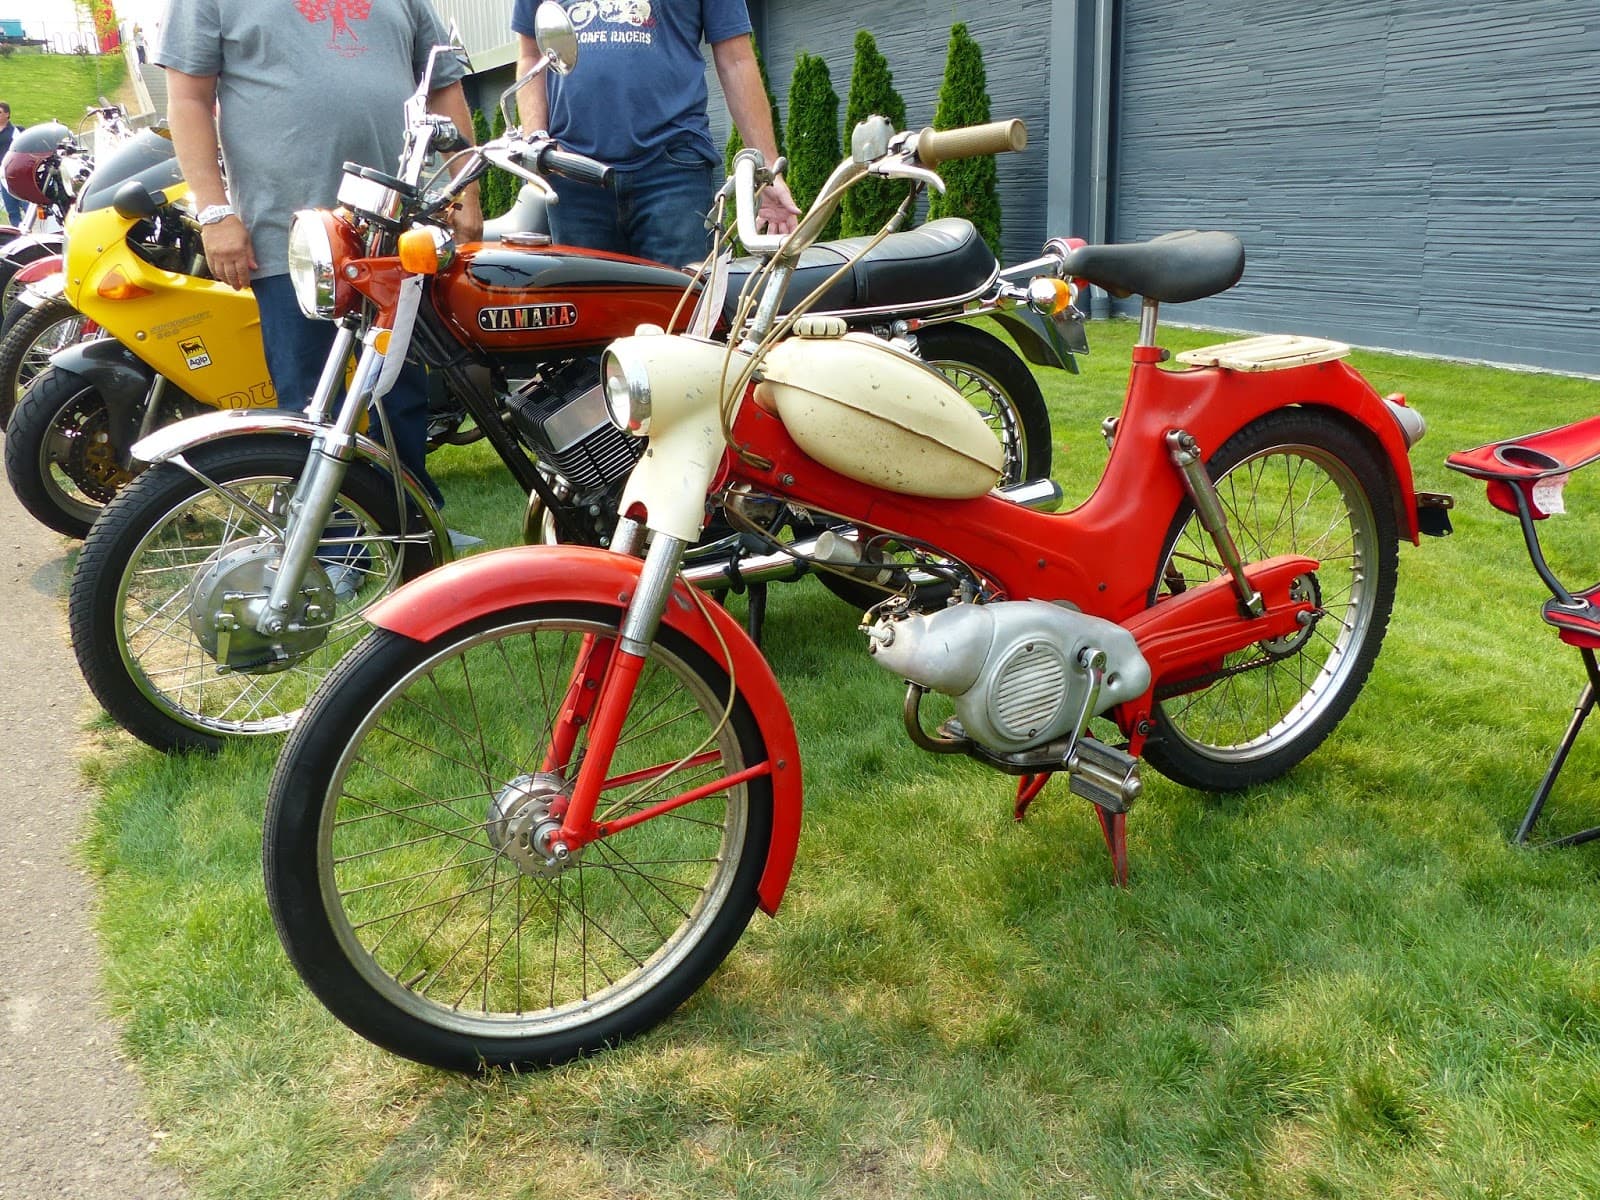 810.94020 Allstate Mo-Ped Puch